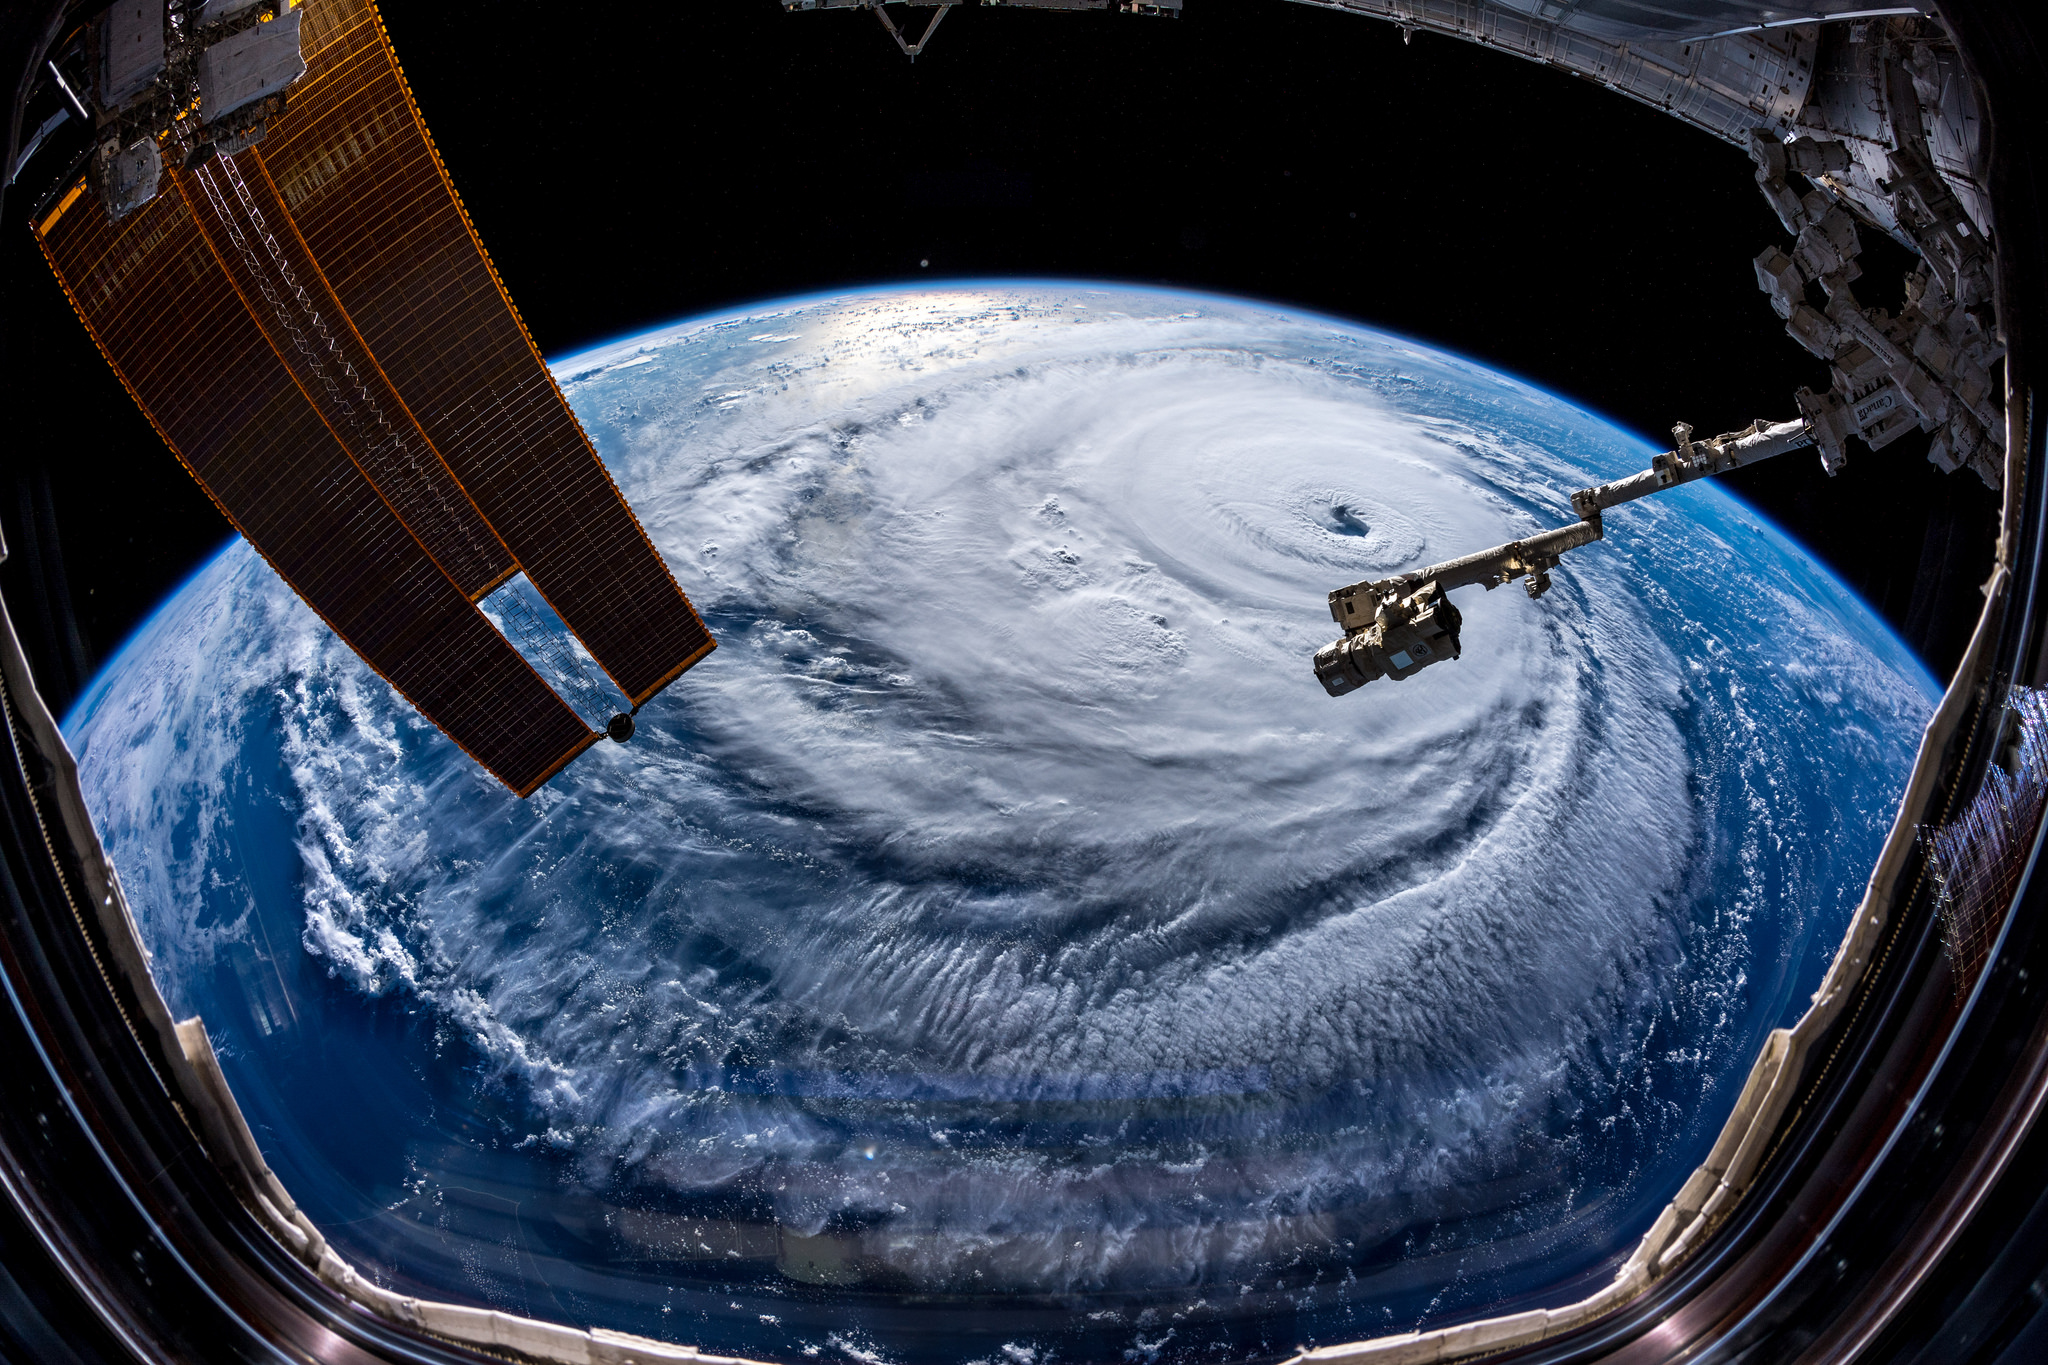 PHOTO: Watch out, America! Hurricane Florence is so enormous, we could only capture her with a super wide angle lens from #ISS, 400 km directly above the eye. Get prepared on the East Coast, this is a no-kidding nightmare coming for you.